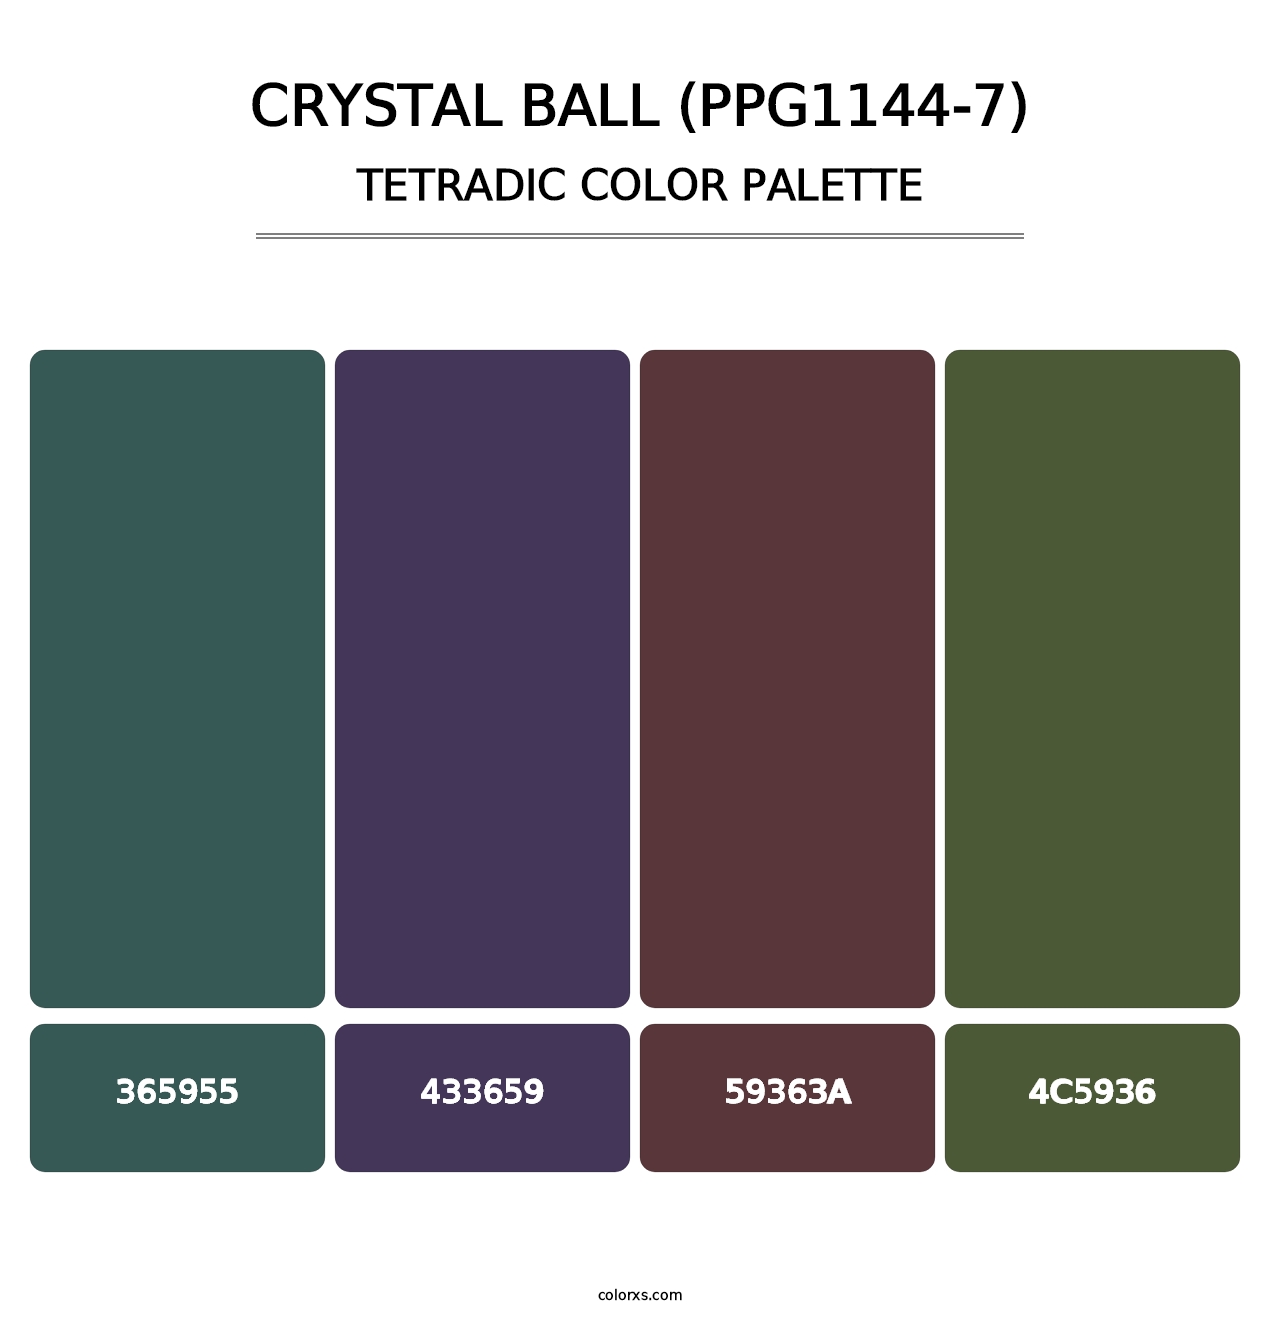 Crystal Ball (PPG1144-7) - Tetradic Color Palette